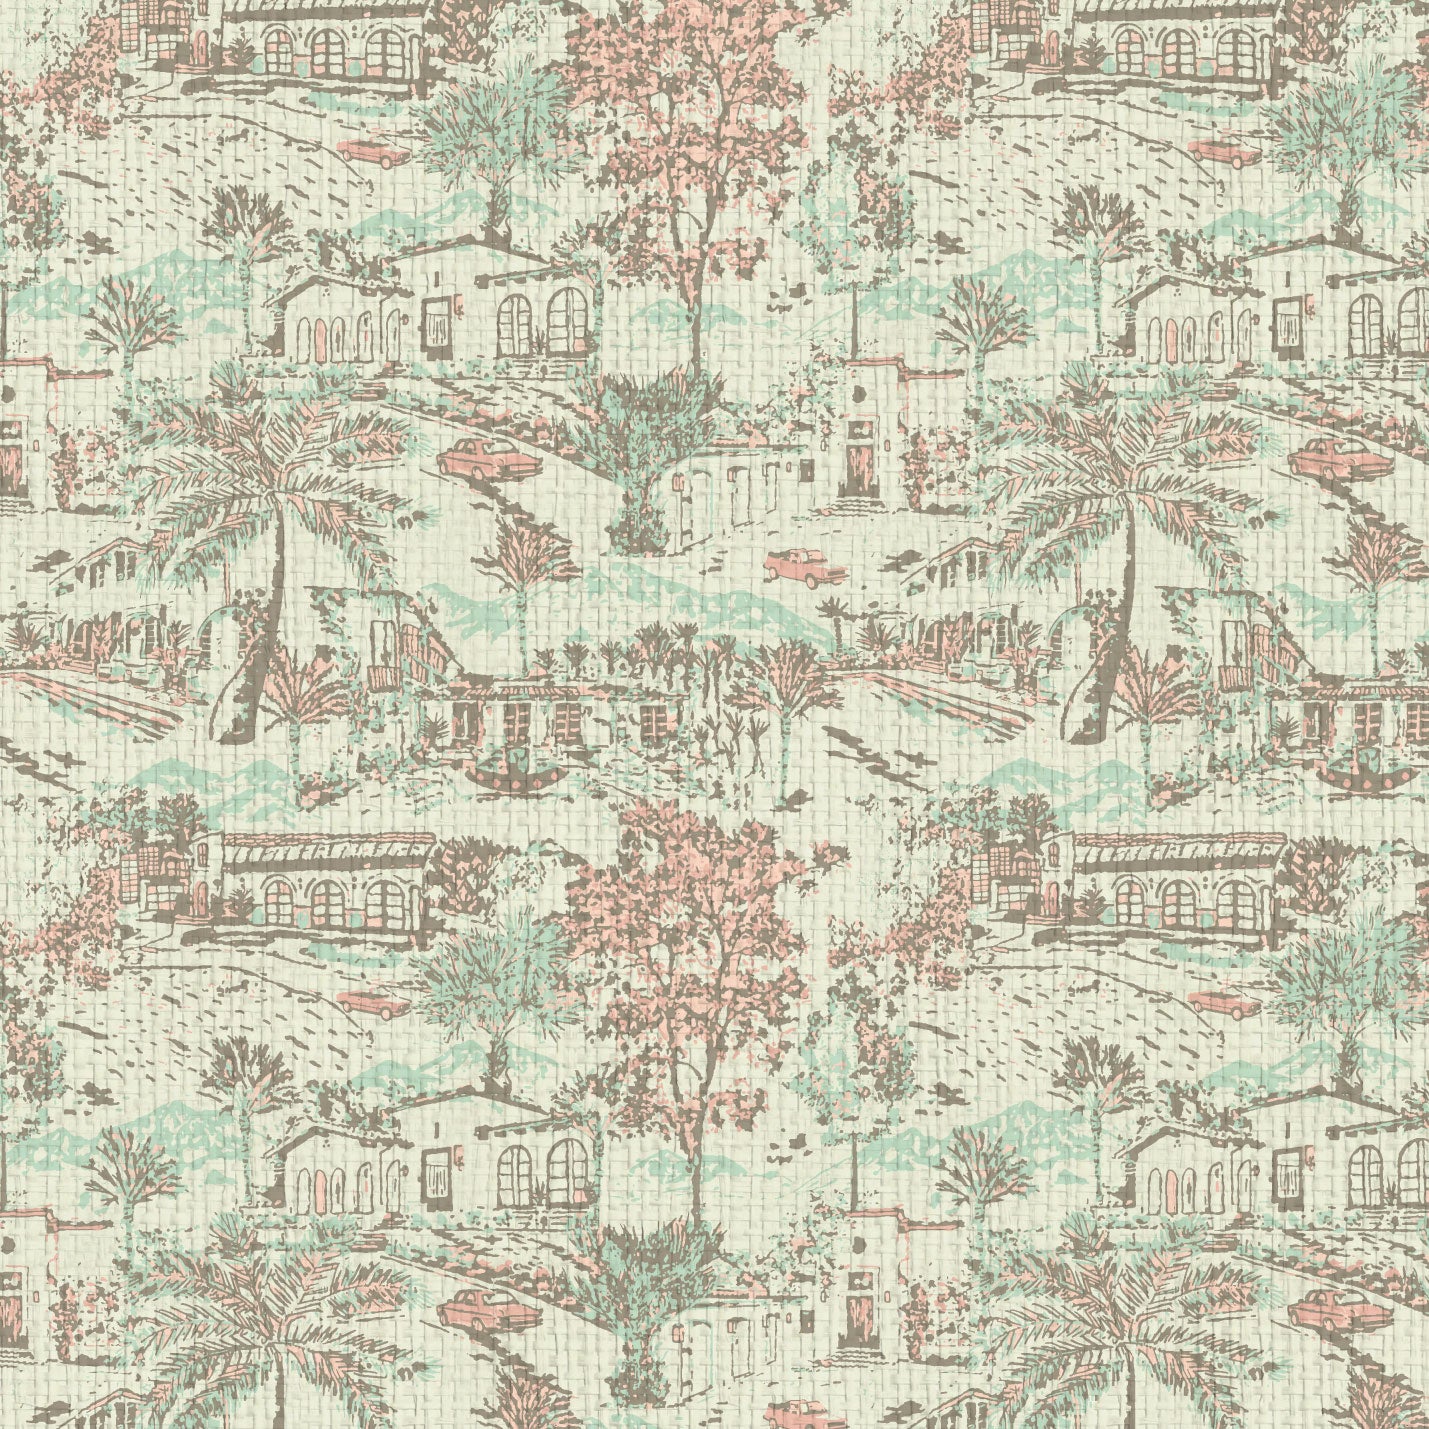 wallpaper Natural Textured Eco-Friendly Non-toxic High-quality Sustainable Interior Design Bold Custom Tailor-made Retro chic tropical coastal garden vacation toile toile de jouy vintage spanish houses car palm tree bougainvillea preppy timeless classic nature mountains ojai california cream off-white pastel pink mint green floral flowers paperweave paper weave